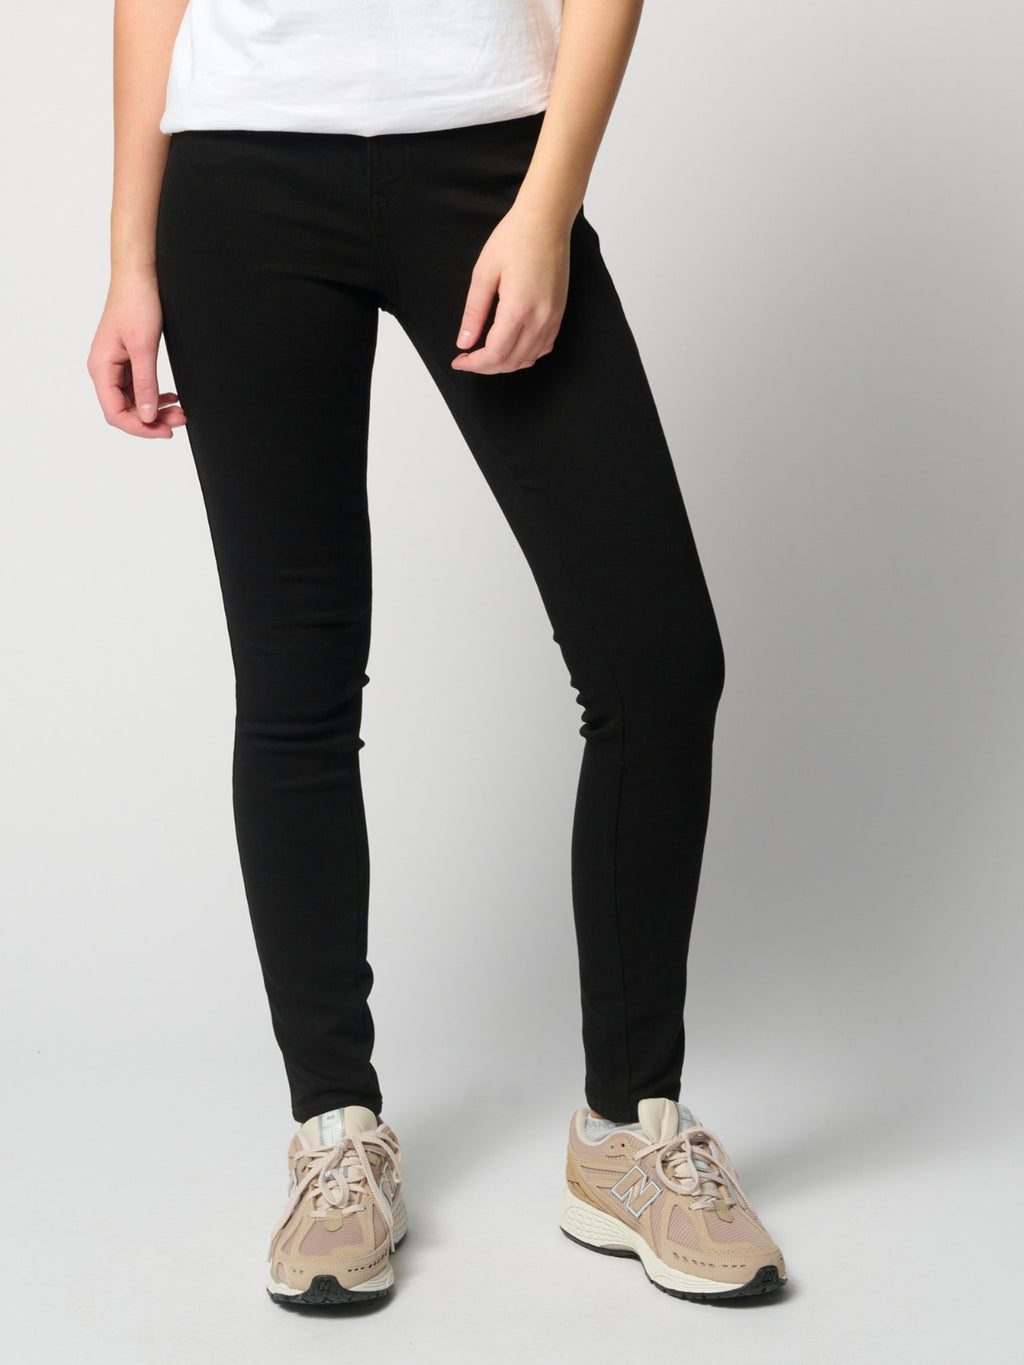 The Original Performance Skinny Jeans ™ ️ Donne - pacchetto (3 pezzi.)